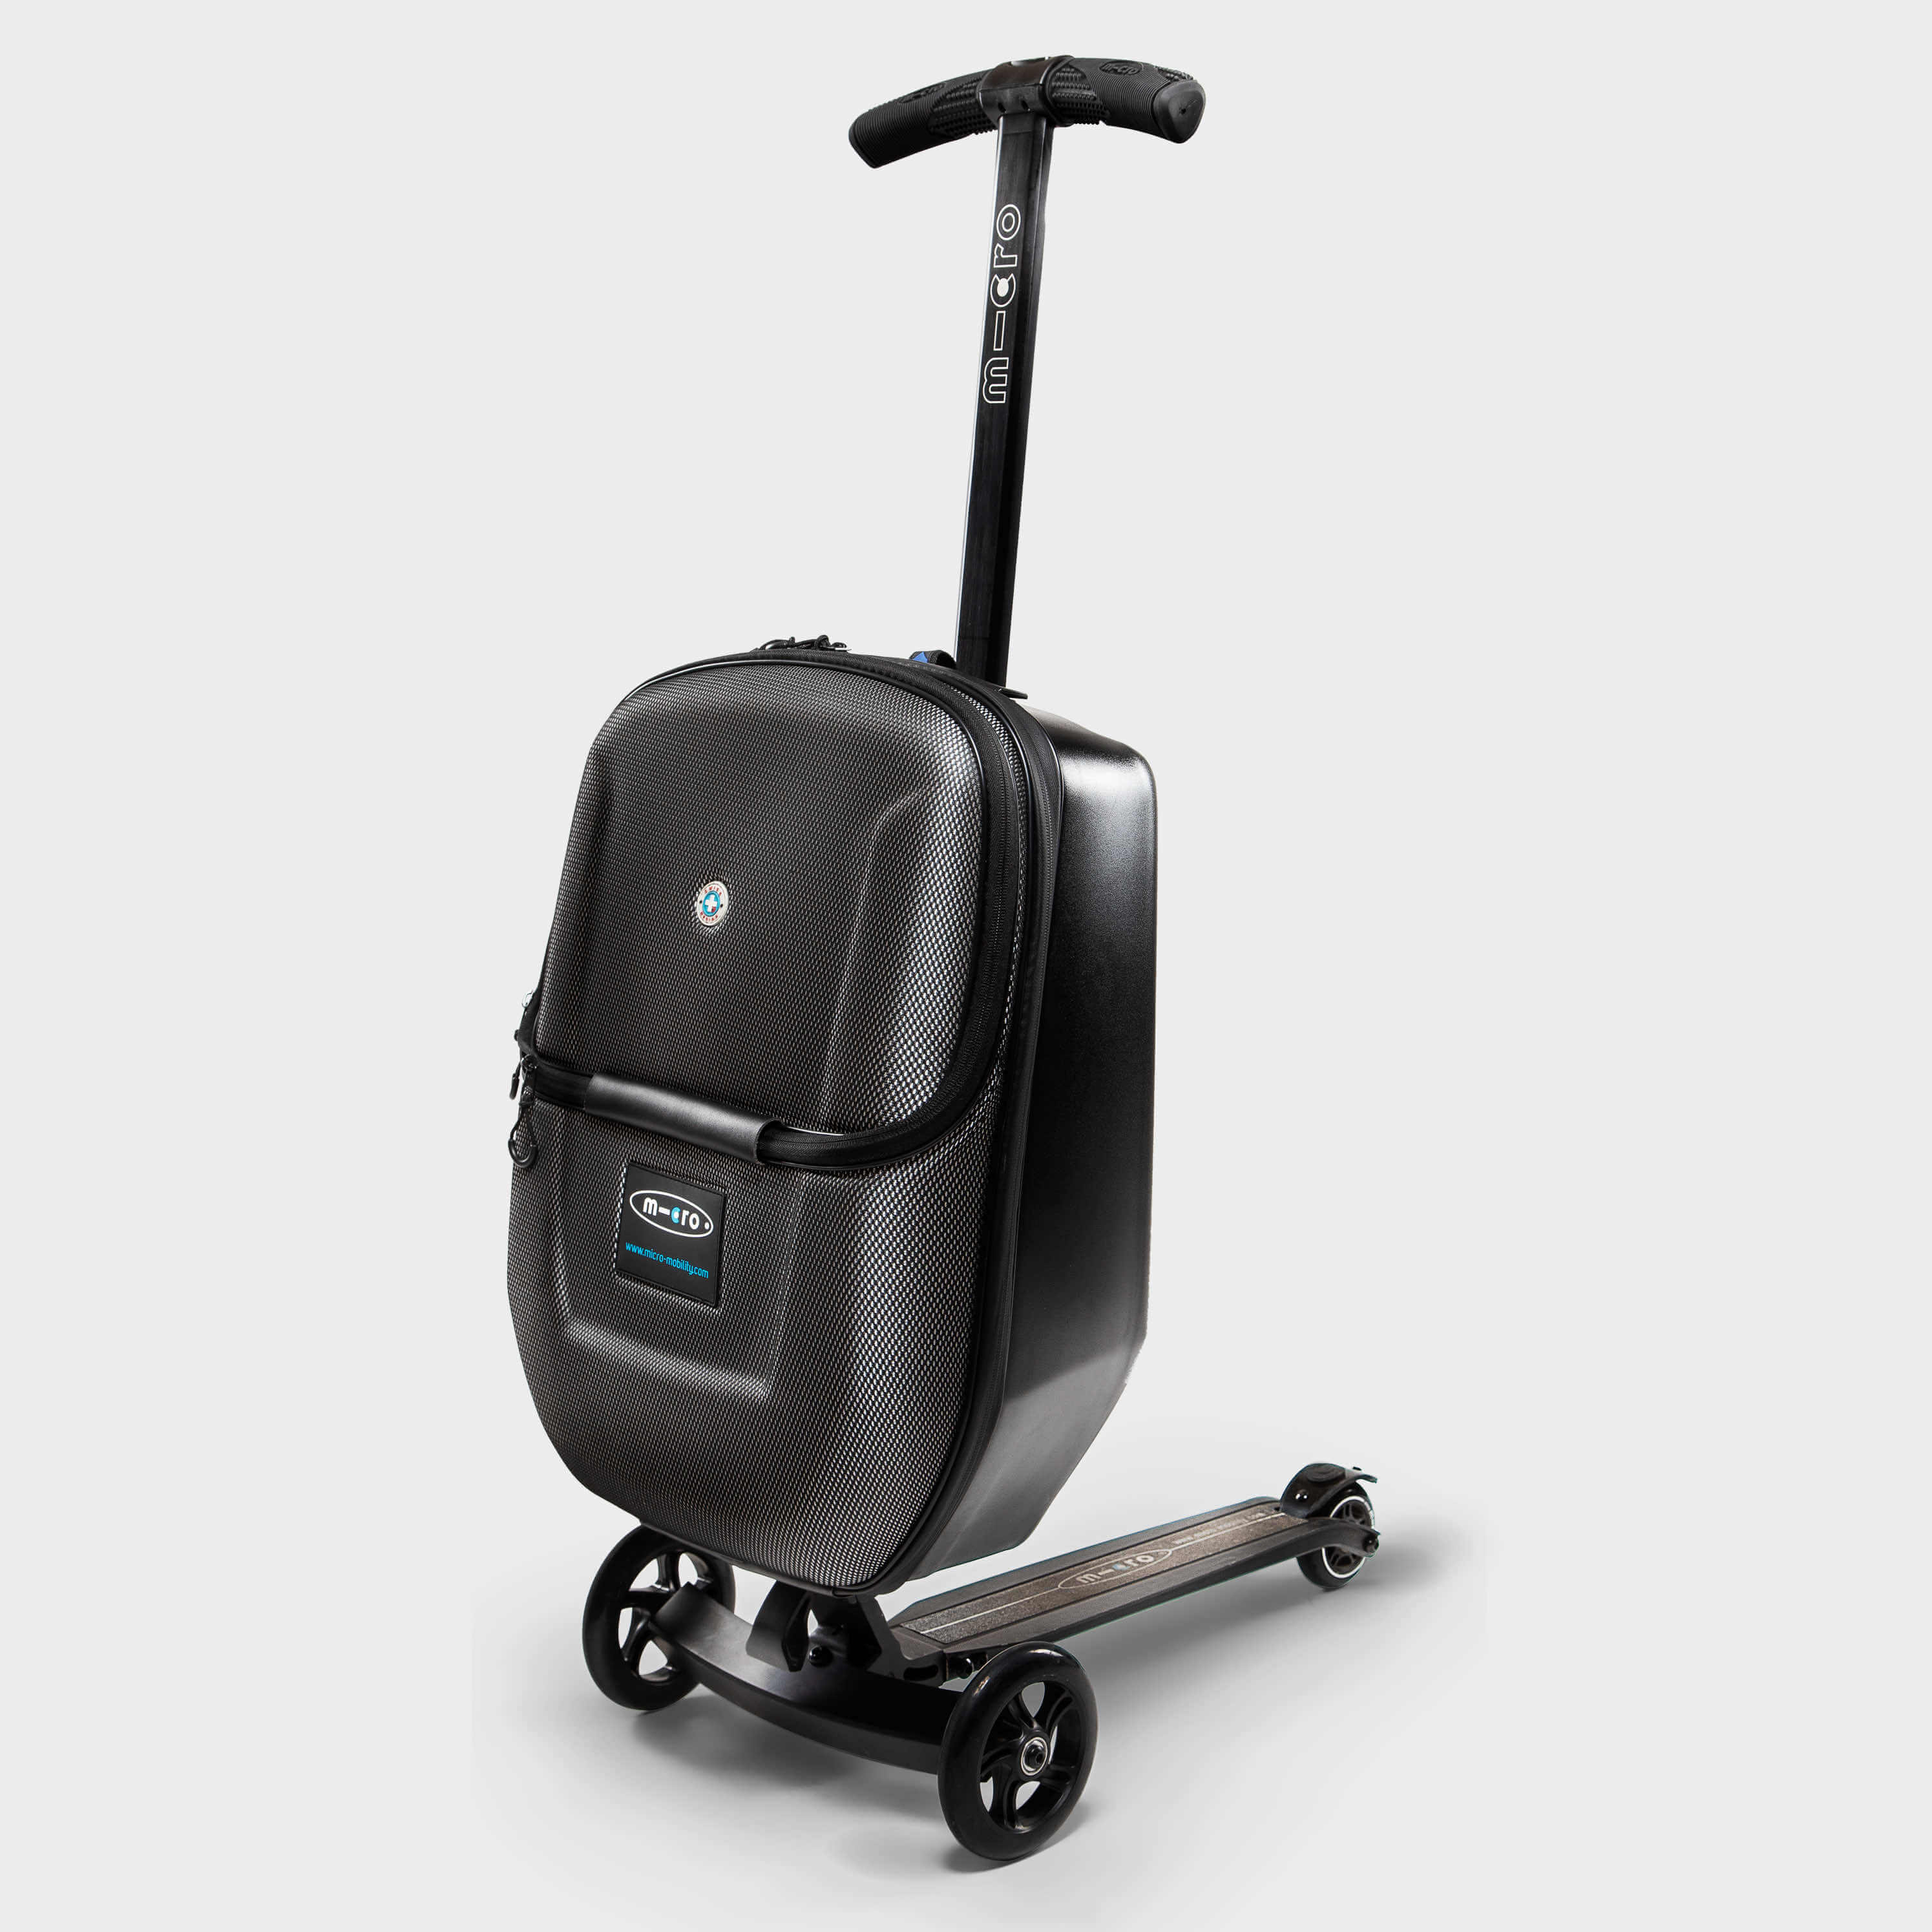 temerario inteligente difícil Micro Adult Luggage Scooter - Black | Micro Scooters Luggage